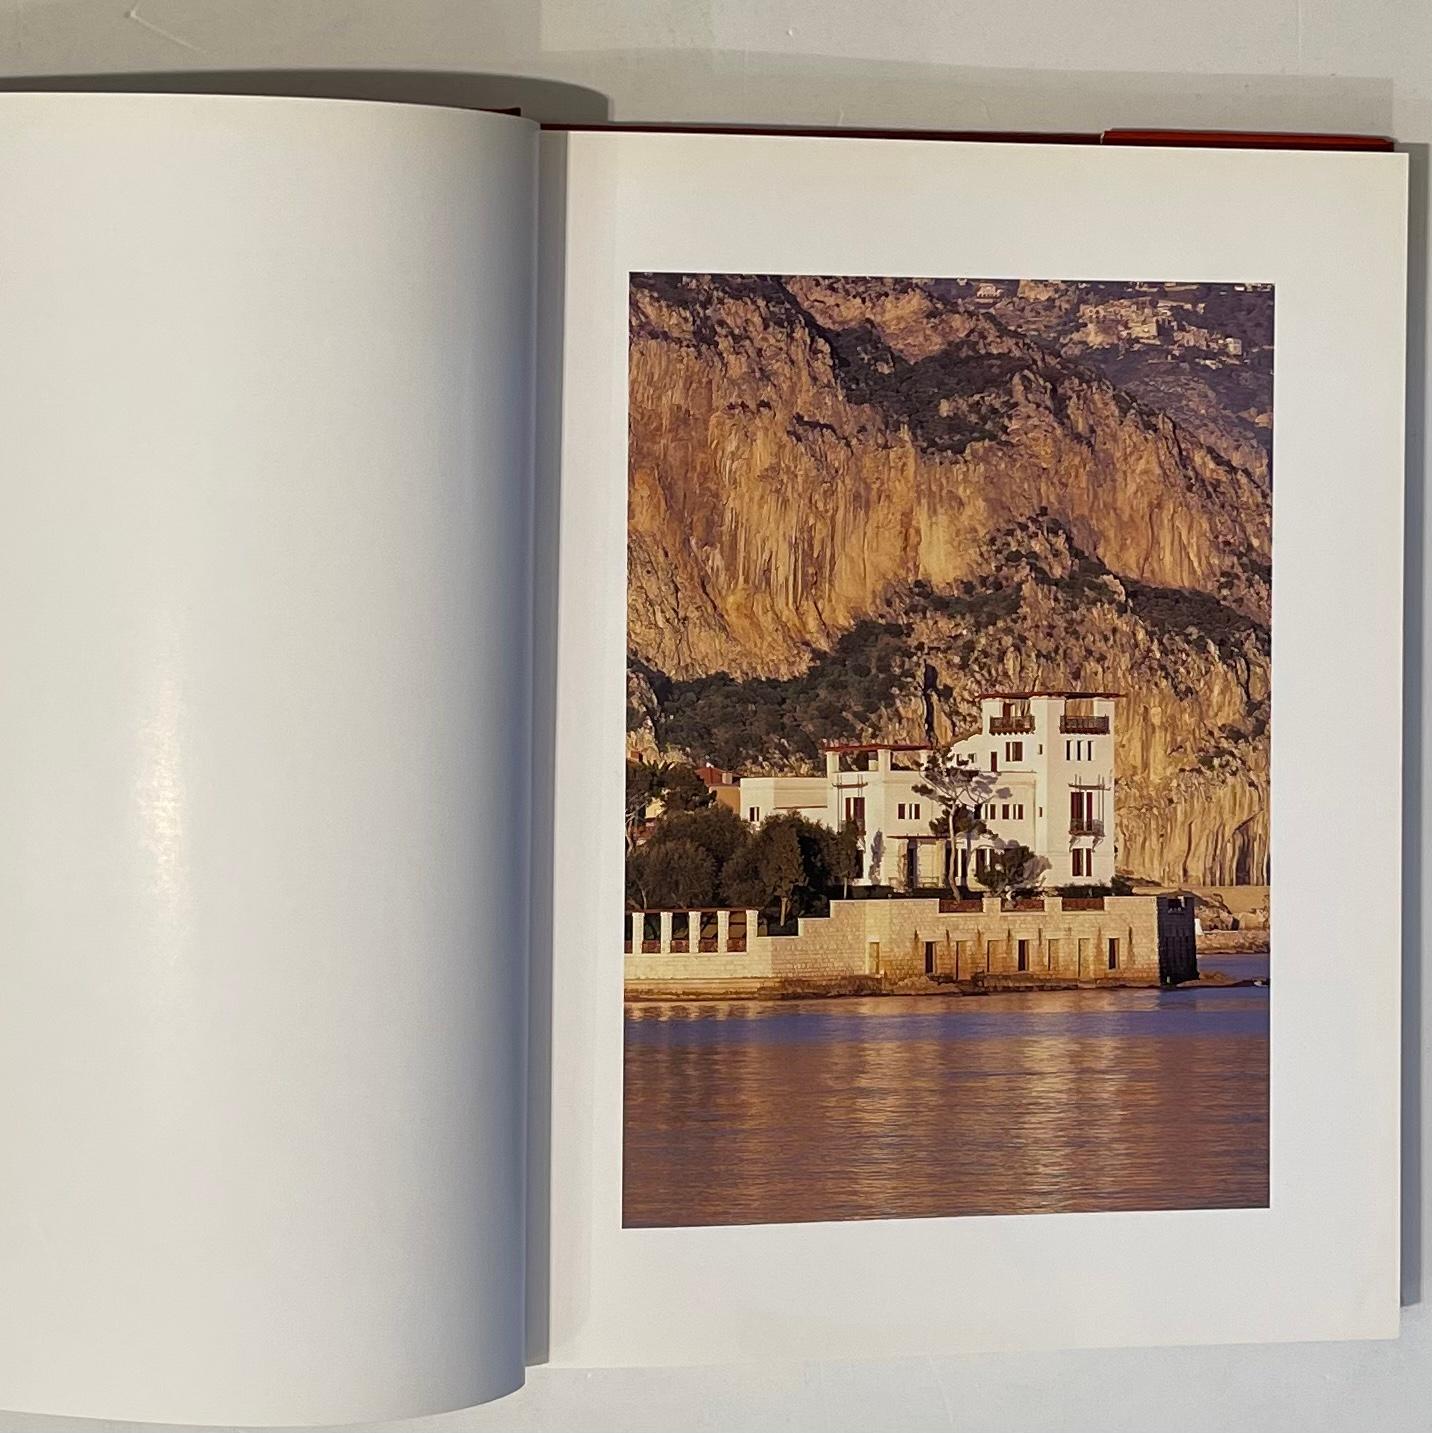 Published by Les Editions de L’Amateur 1997 preface by Karl Lagerfeld French text.

Beautiful images of the Villa Kerylos in the South of France whose architecture was inspired by Ancient Greece.
